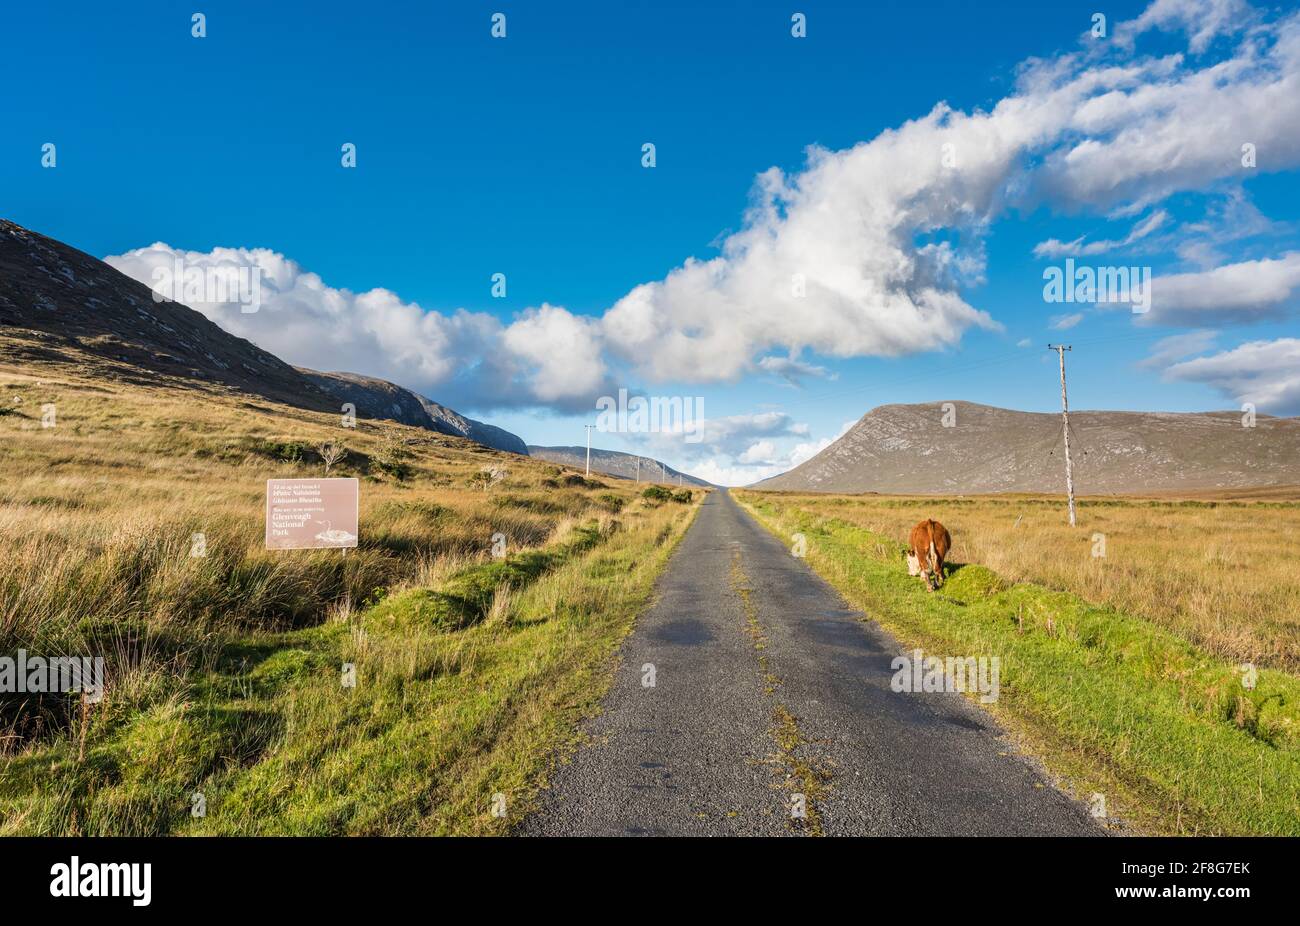 Country road from the village of Doochary towards the Glenveagh National Park, County Donegal, Ireland, with cattle grazing on the road verge Stock Photo